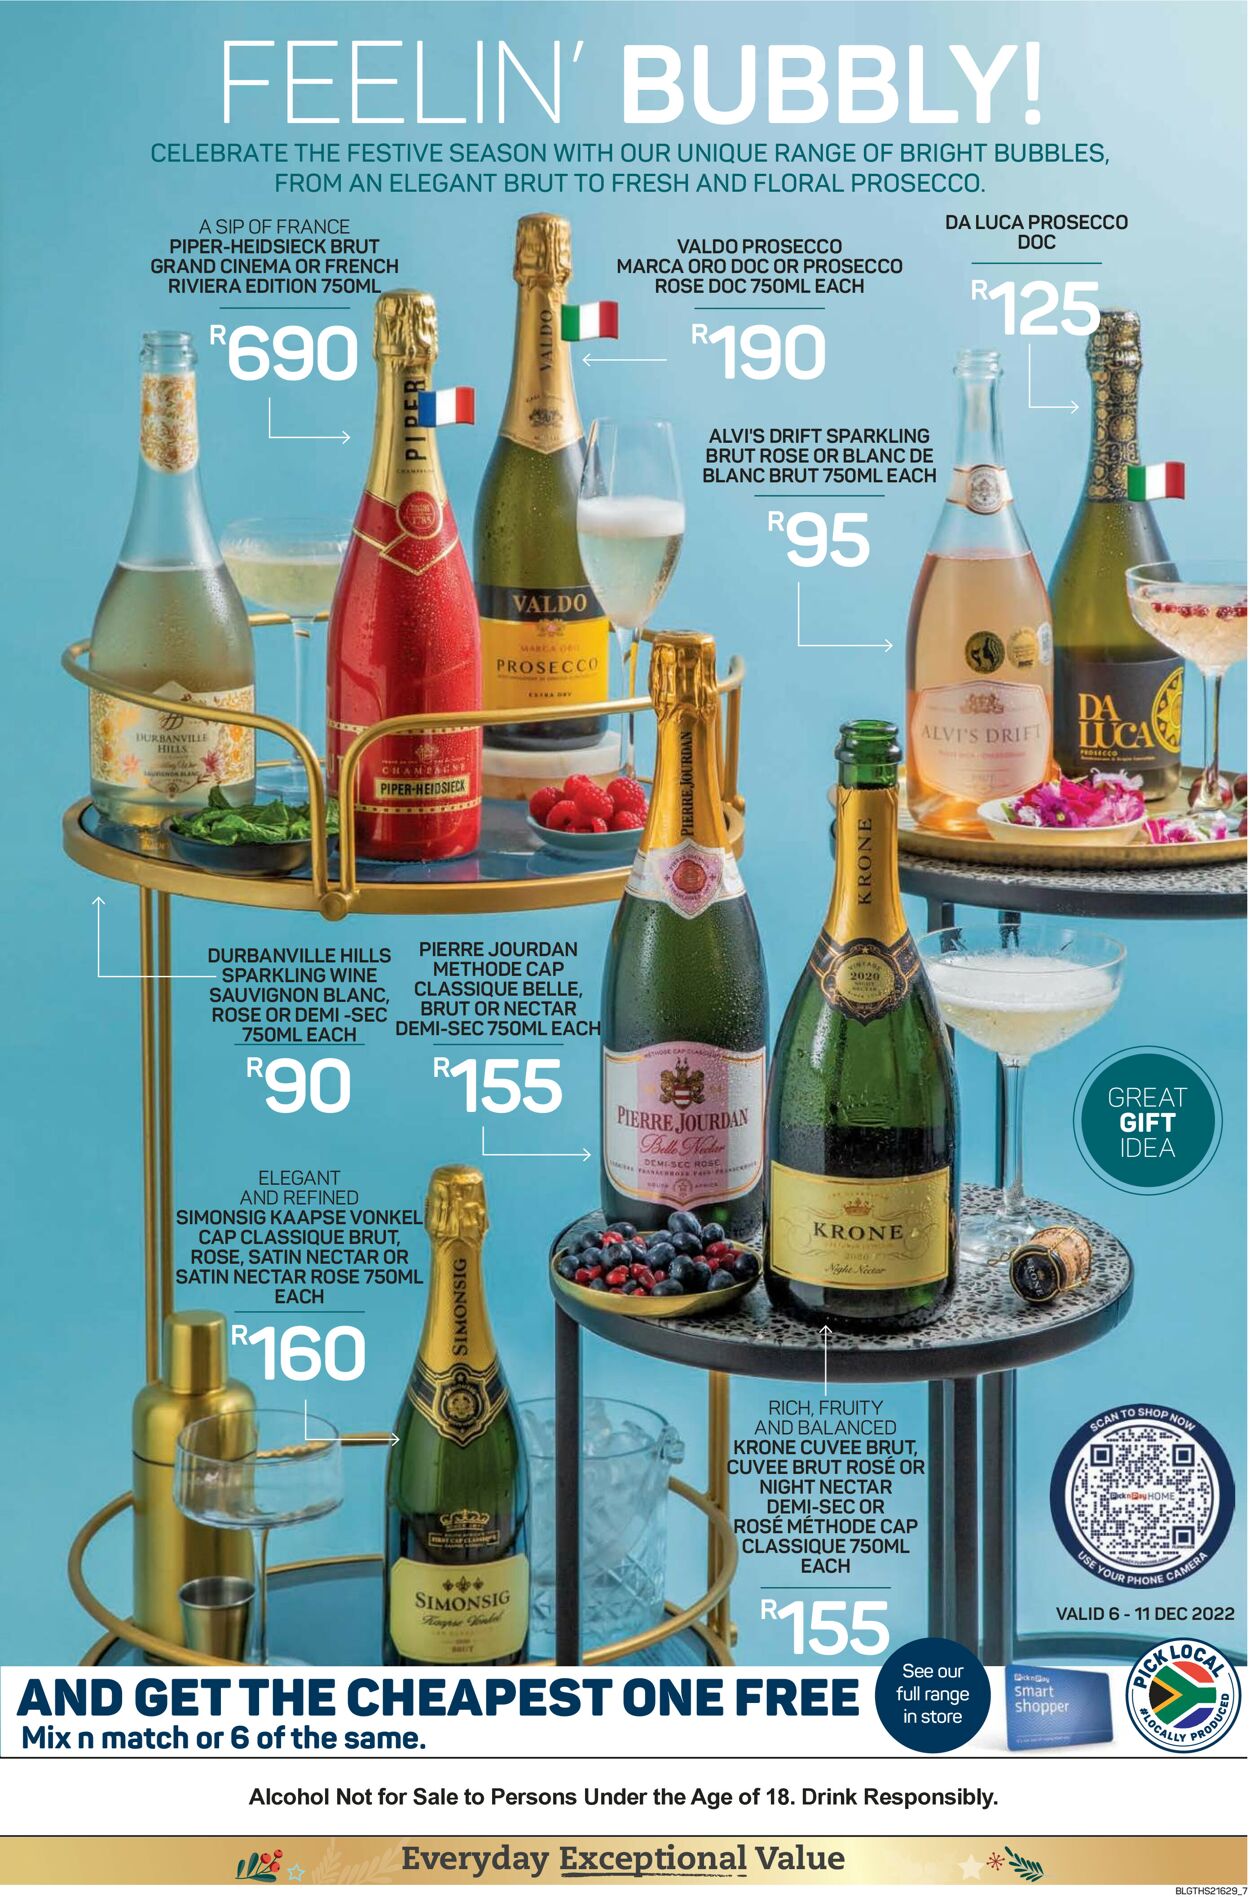 Pick n Pay Catalogue - 2022/12/06-2022/12/11 (Page 7)